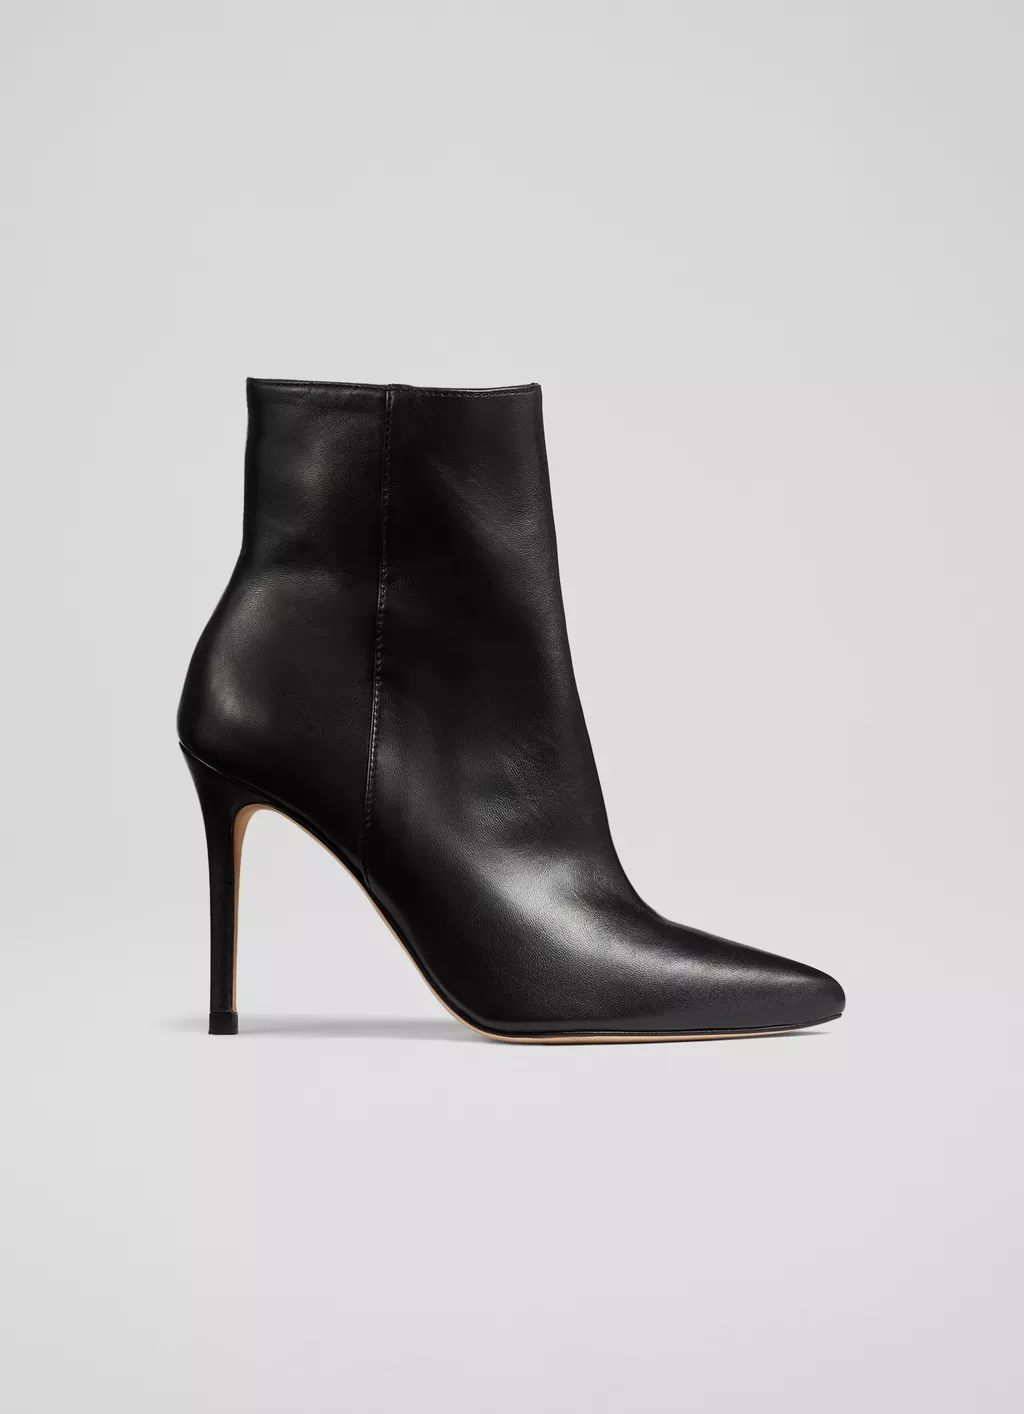 Cleo Black Leather Pointed Stiletto Ankle Boots | L.K. Bennett (UK)